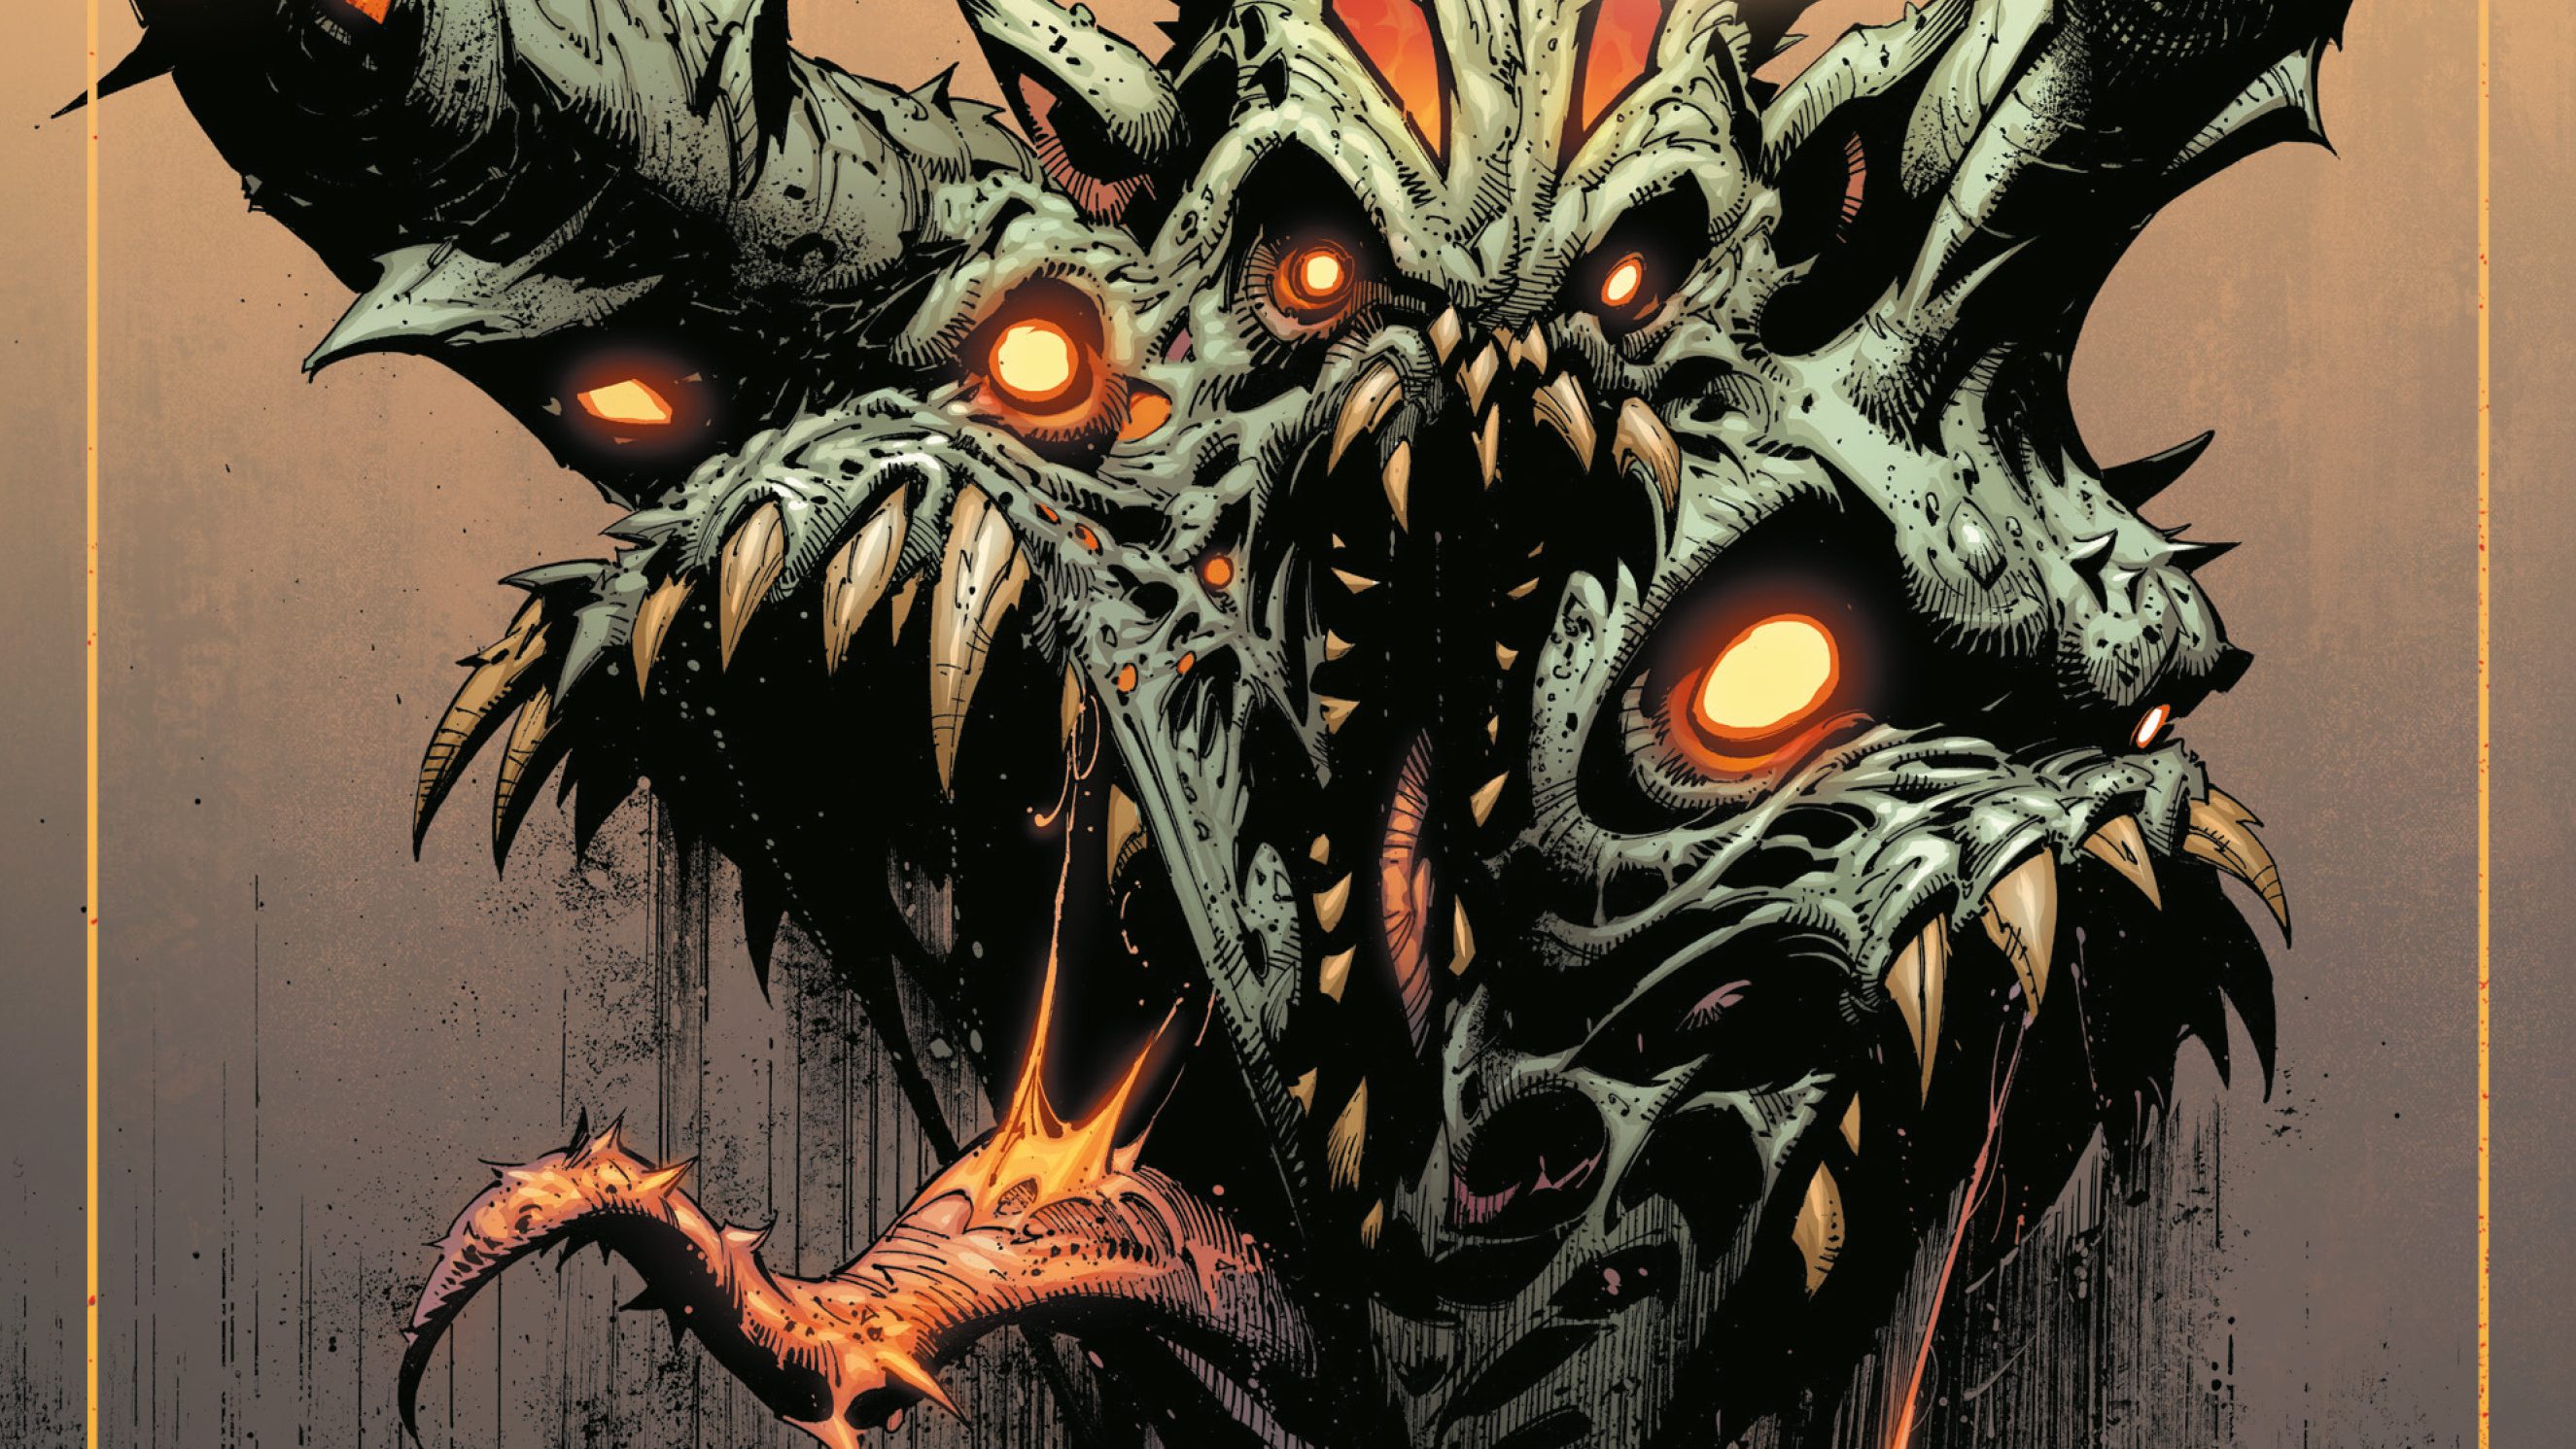 Dark Horse Announces Print Version Of WE HAVE DEMONS Series From Scott Snyder And Greg Capullo